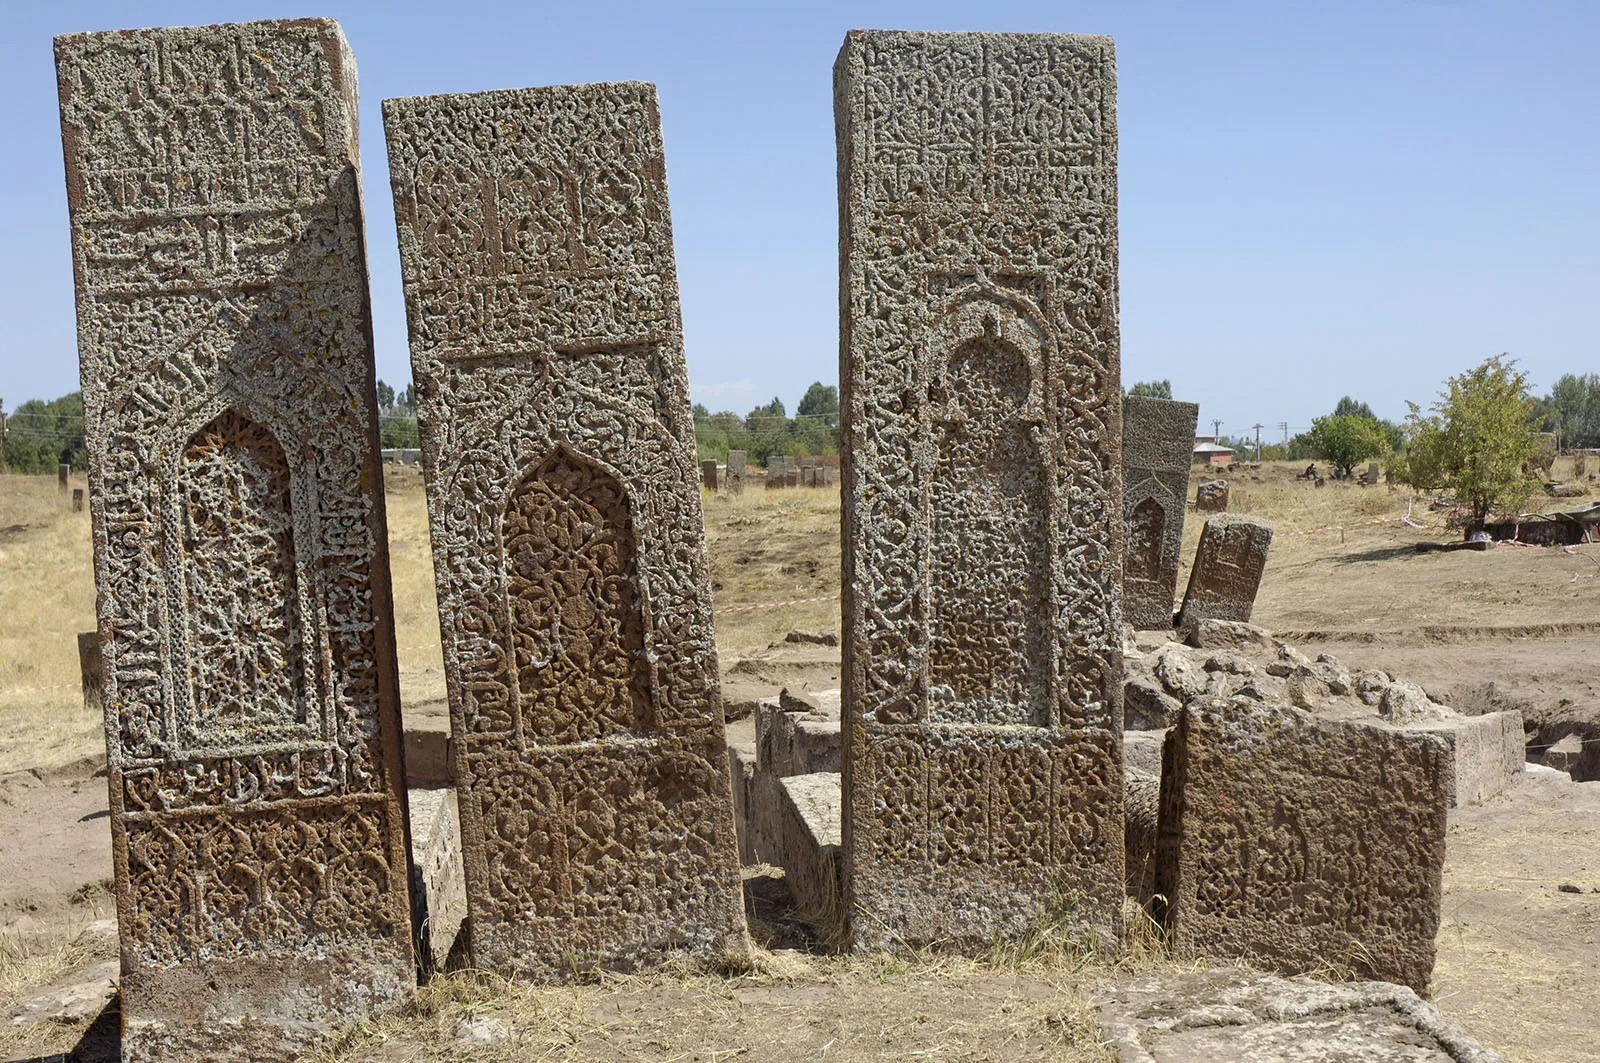 Photo showing: From the Wikipedia I understood the gravestones are by the Ahlatshah, also known as Shah-Armens. There are hundreds of them, some towering over visitors, and have great stone carving.